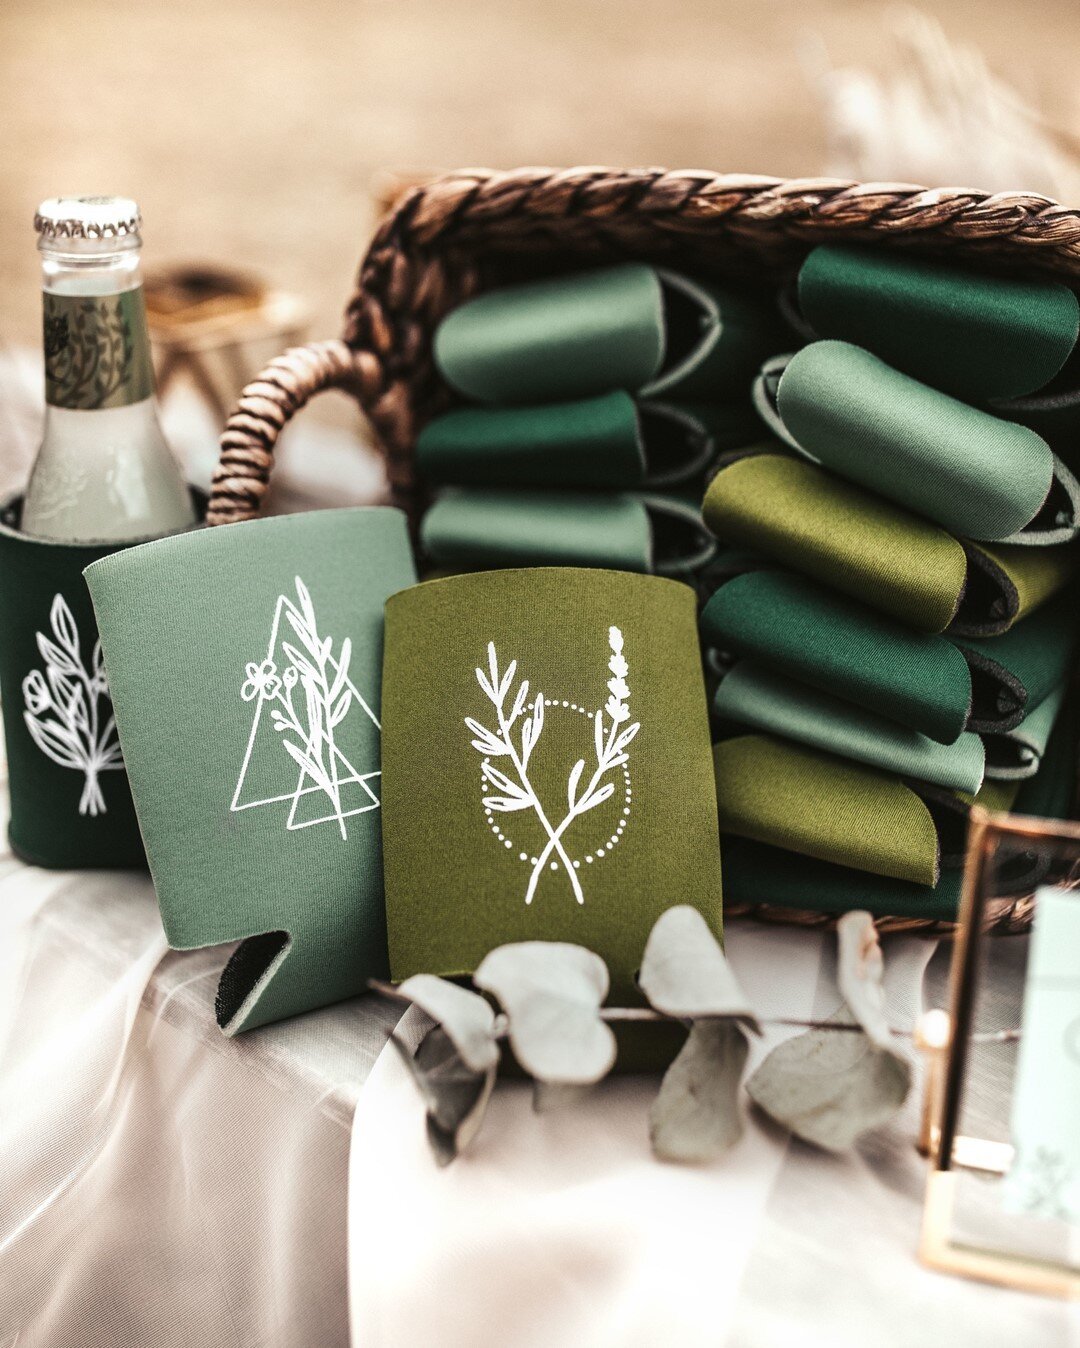 More botanical drink cooler colors are being restocked this weekend 👏 We're excited to have more olive, sage + forest for all your upcoming Autumn Weddings! 🍃